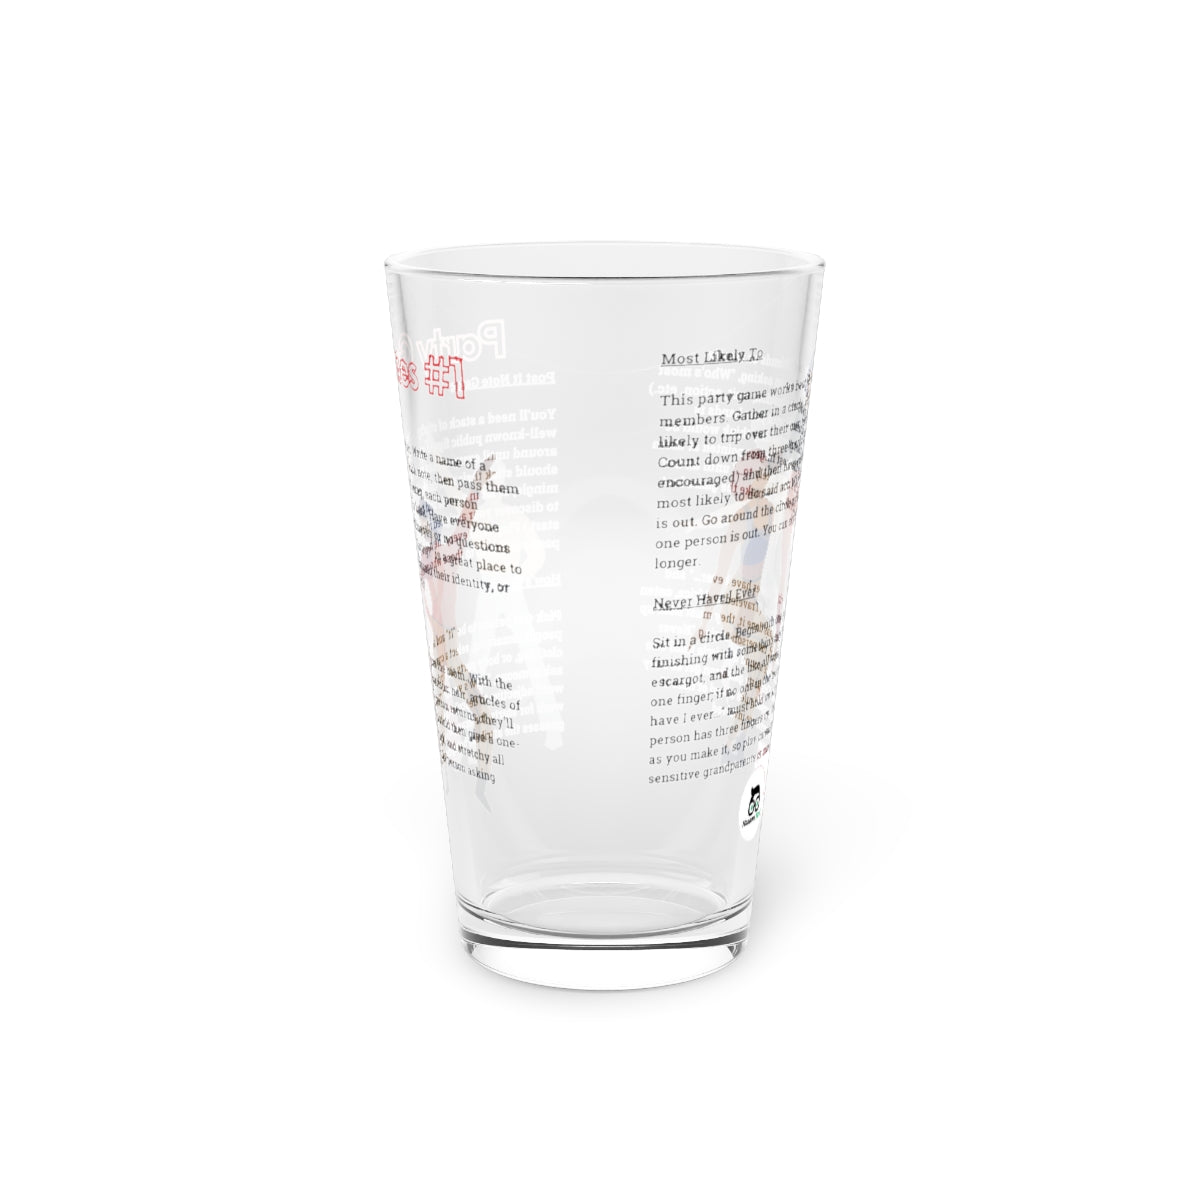 Party Games #1 Pint Glass